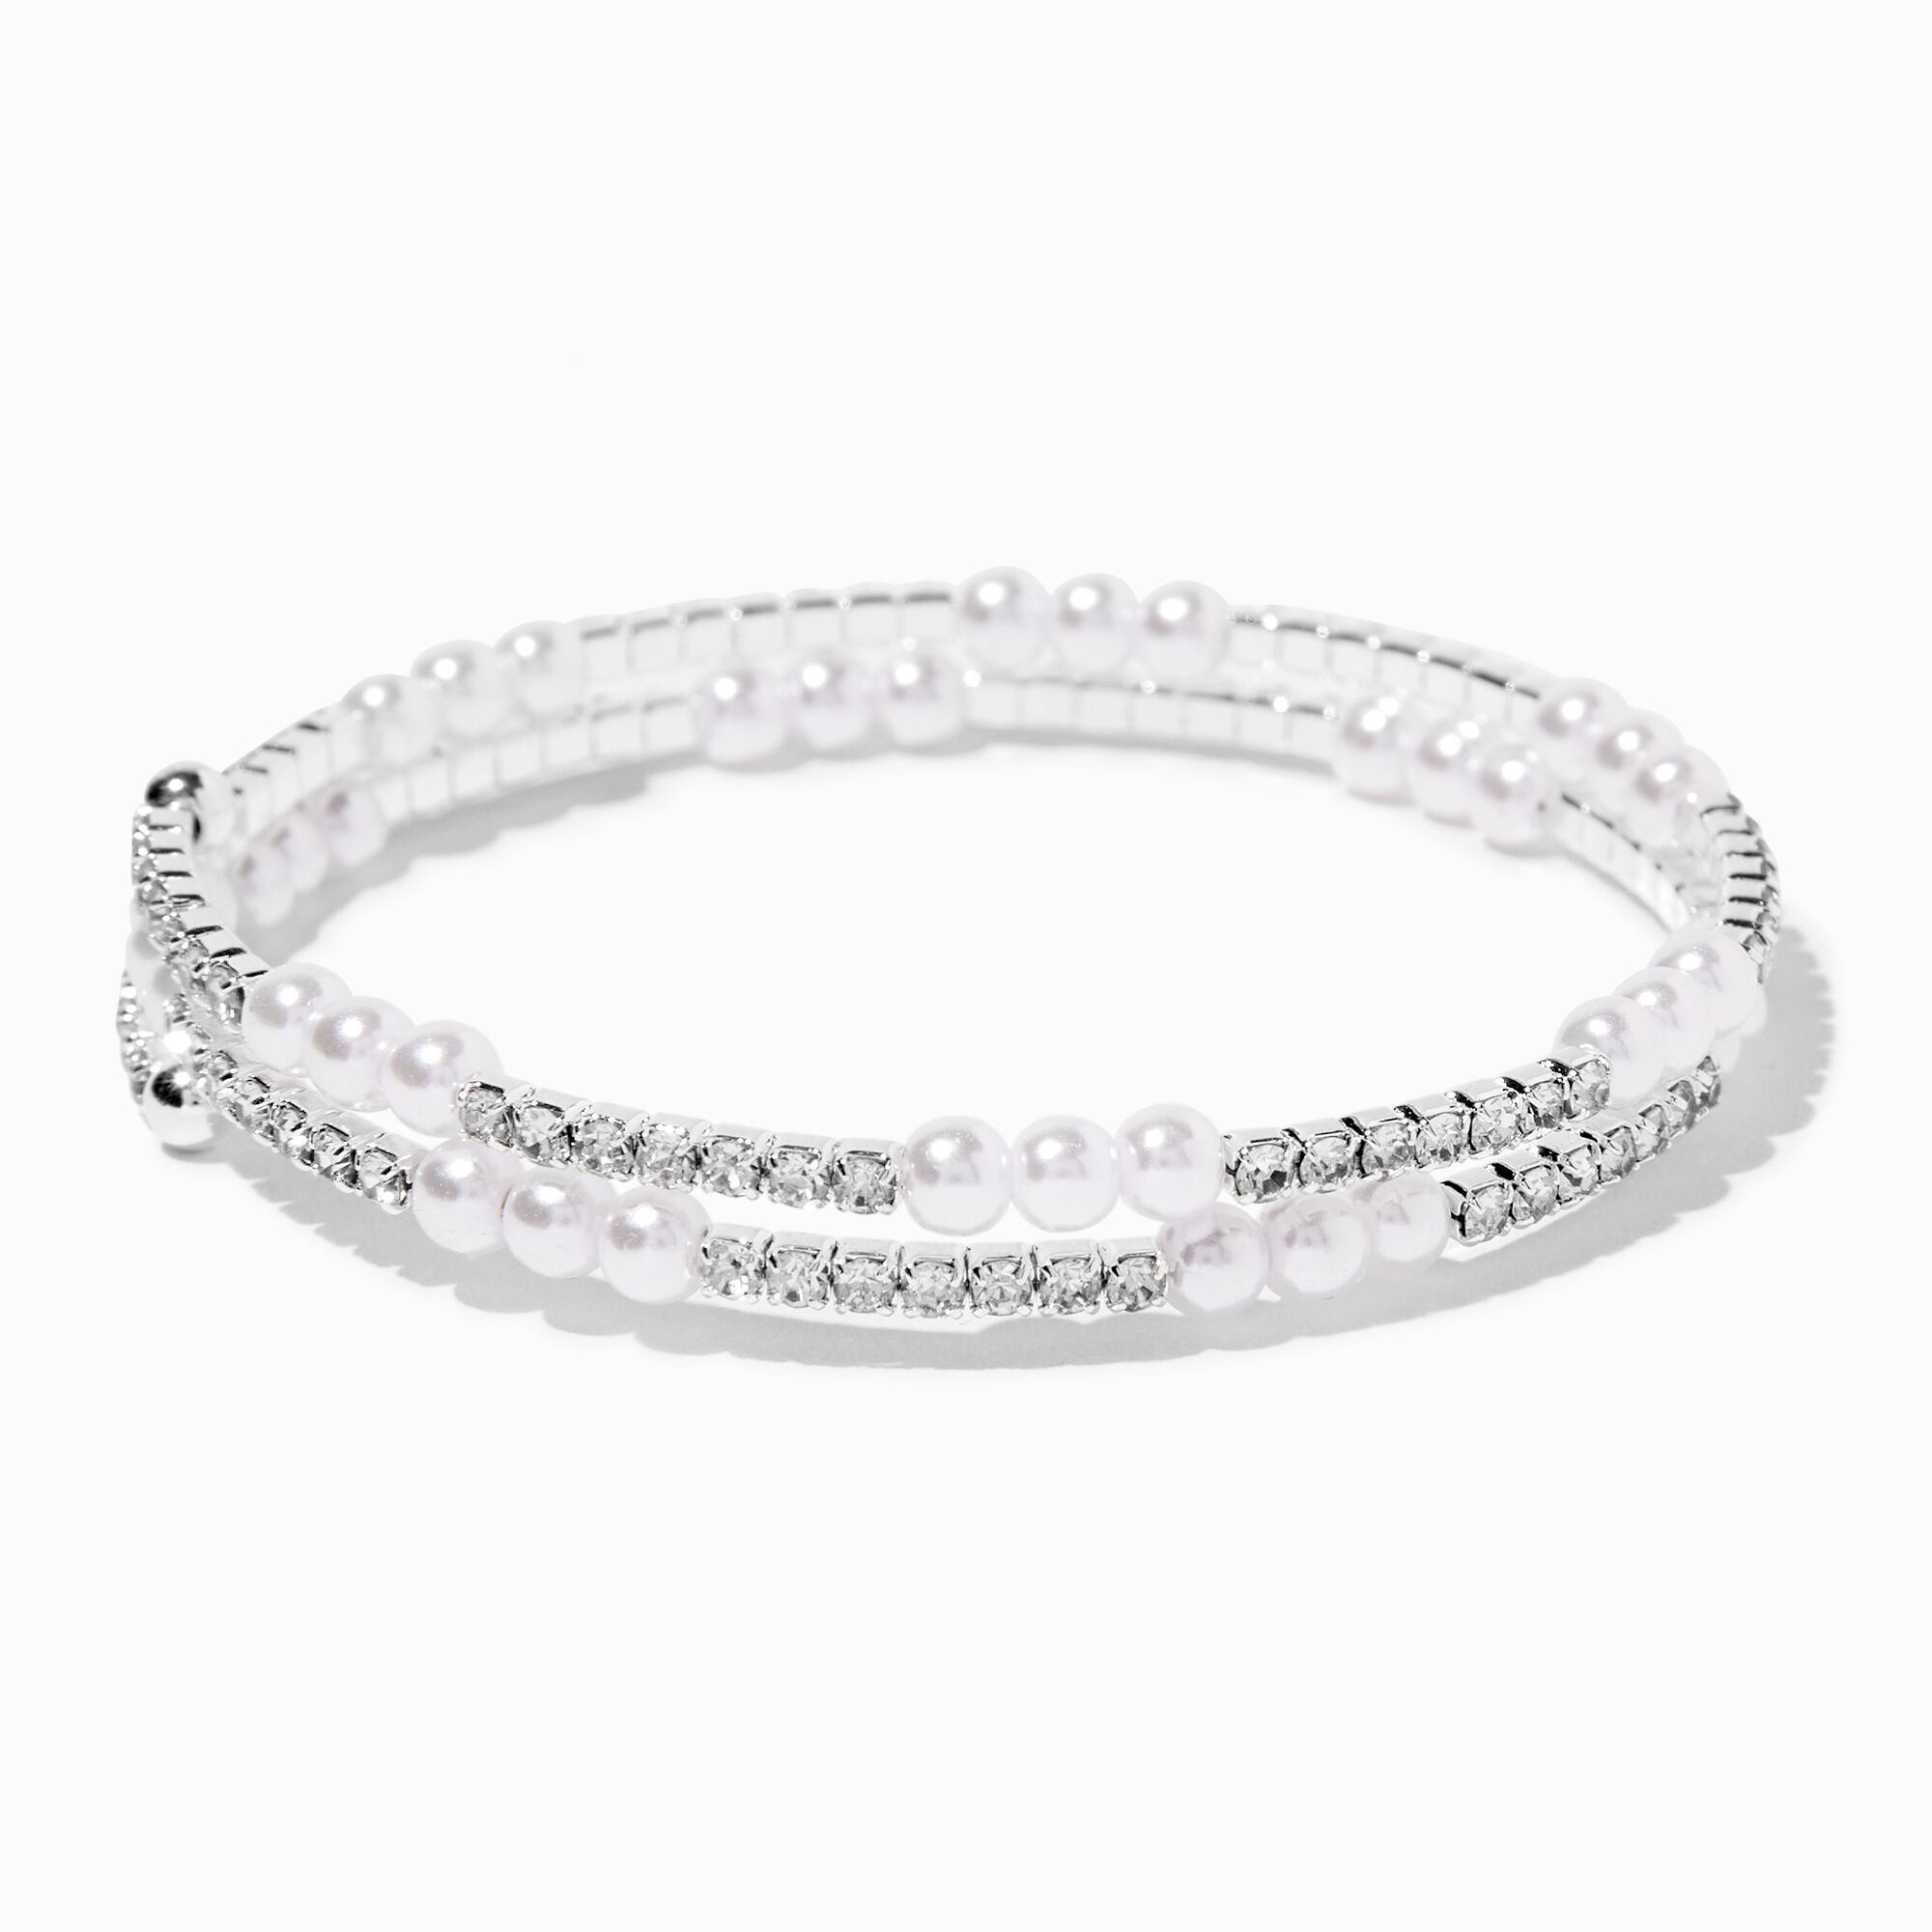 View Claires Tone Crystal Pearl Wrap Bracelet Silver information